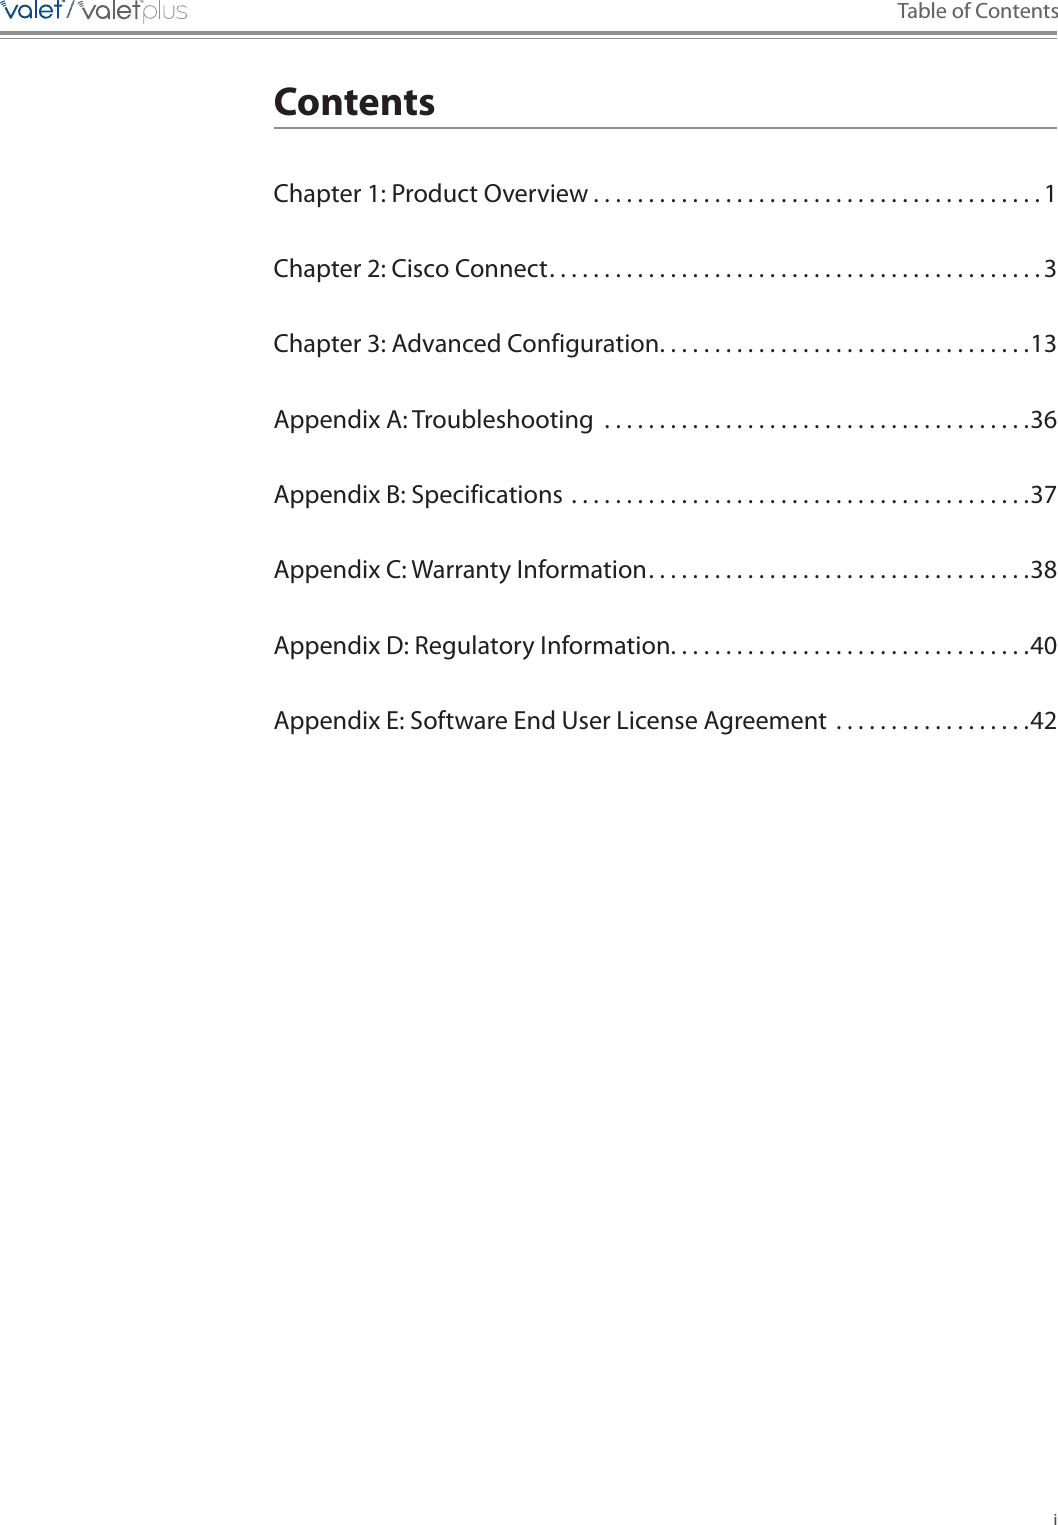 i Table of Contents/////ContentsChapter 1: Product Overview . . . . . . . . . . . . . . . . . . . . . . . . . . . . . . . . . . . . . . . . . 1Chapter 2: Cisco Connect . . . . . . . . . . . . . . . . . . . . . . . . . . . . . . . . . . . . . . . . . . . . . 3Chapter 3: Advanced Configuration . . . . . . . . . . . . . . . . . . . . . . . . . . . . . . . . . .13Appendix A: Troubleshooting  . . . . . . . . . . . . . . . . . . . . . . . . . . . . . . . . . . . . . . .36Appendix B: Specifications . . . . . . . . . . . . . . . . . . . . . . . . . . . . . . . . . . . . . . . . . .37Appendix C: Warranty Information . . . . . . . . . . . . . . . . . . . . . . . . . . . . . . . . . . .38Appendix D: Regulatory Information . . . . . . . . . . . . . . . . . . . . . . . . . . . . . . . . .40Appendix E: Software End User License Agreement  . . . . . . . . . . . . . . . . . .42